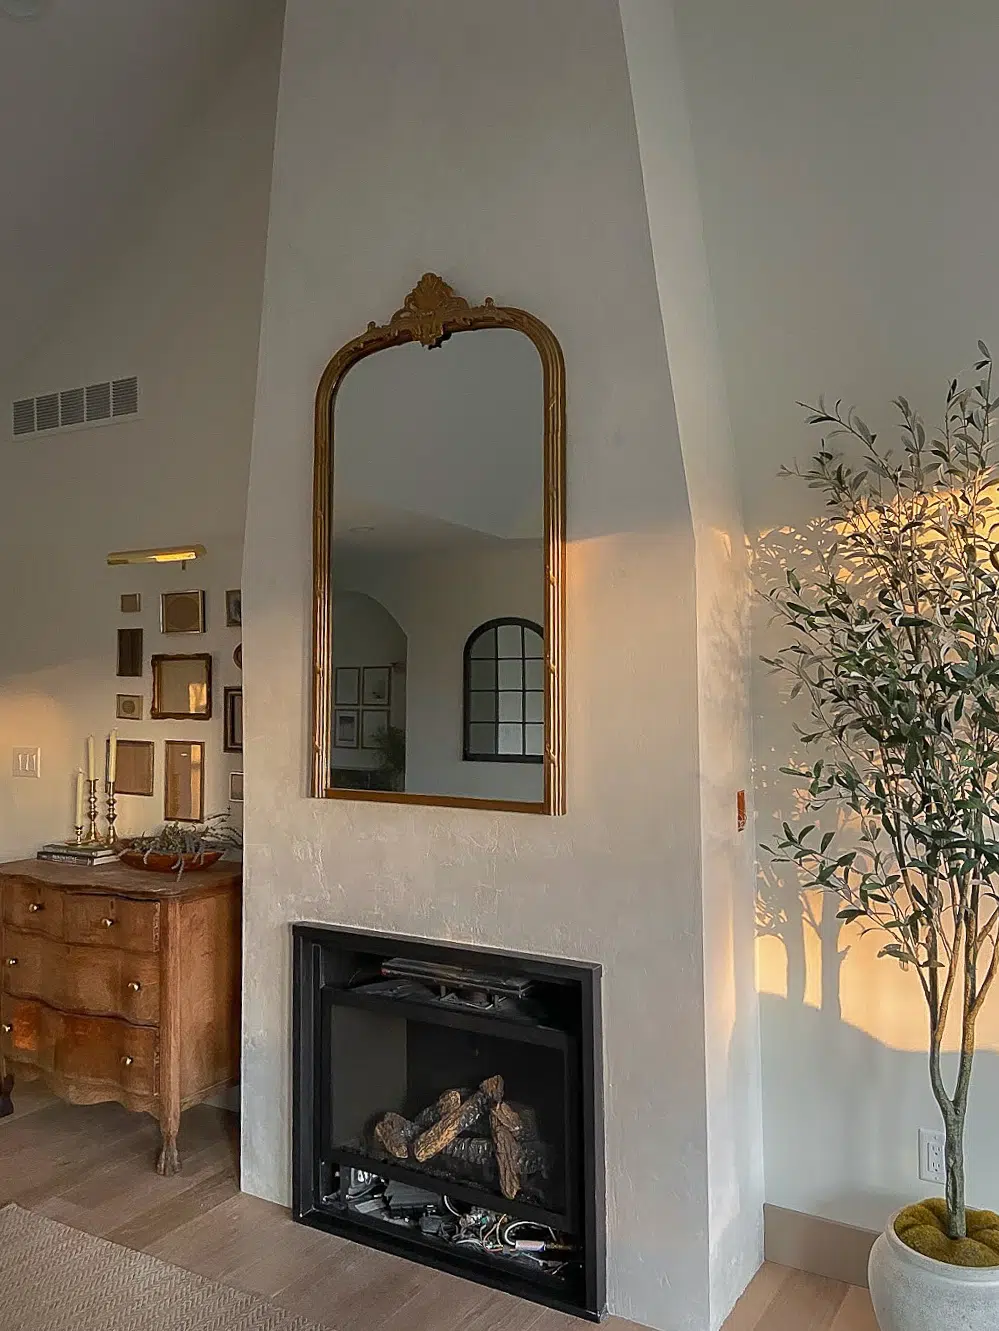 DIY plaster of paris white tapered fireplace great room